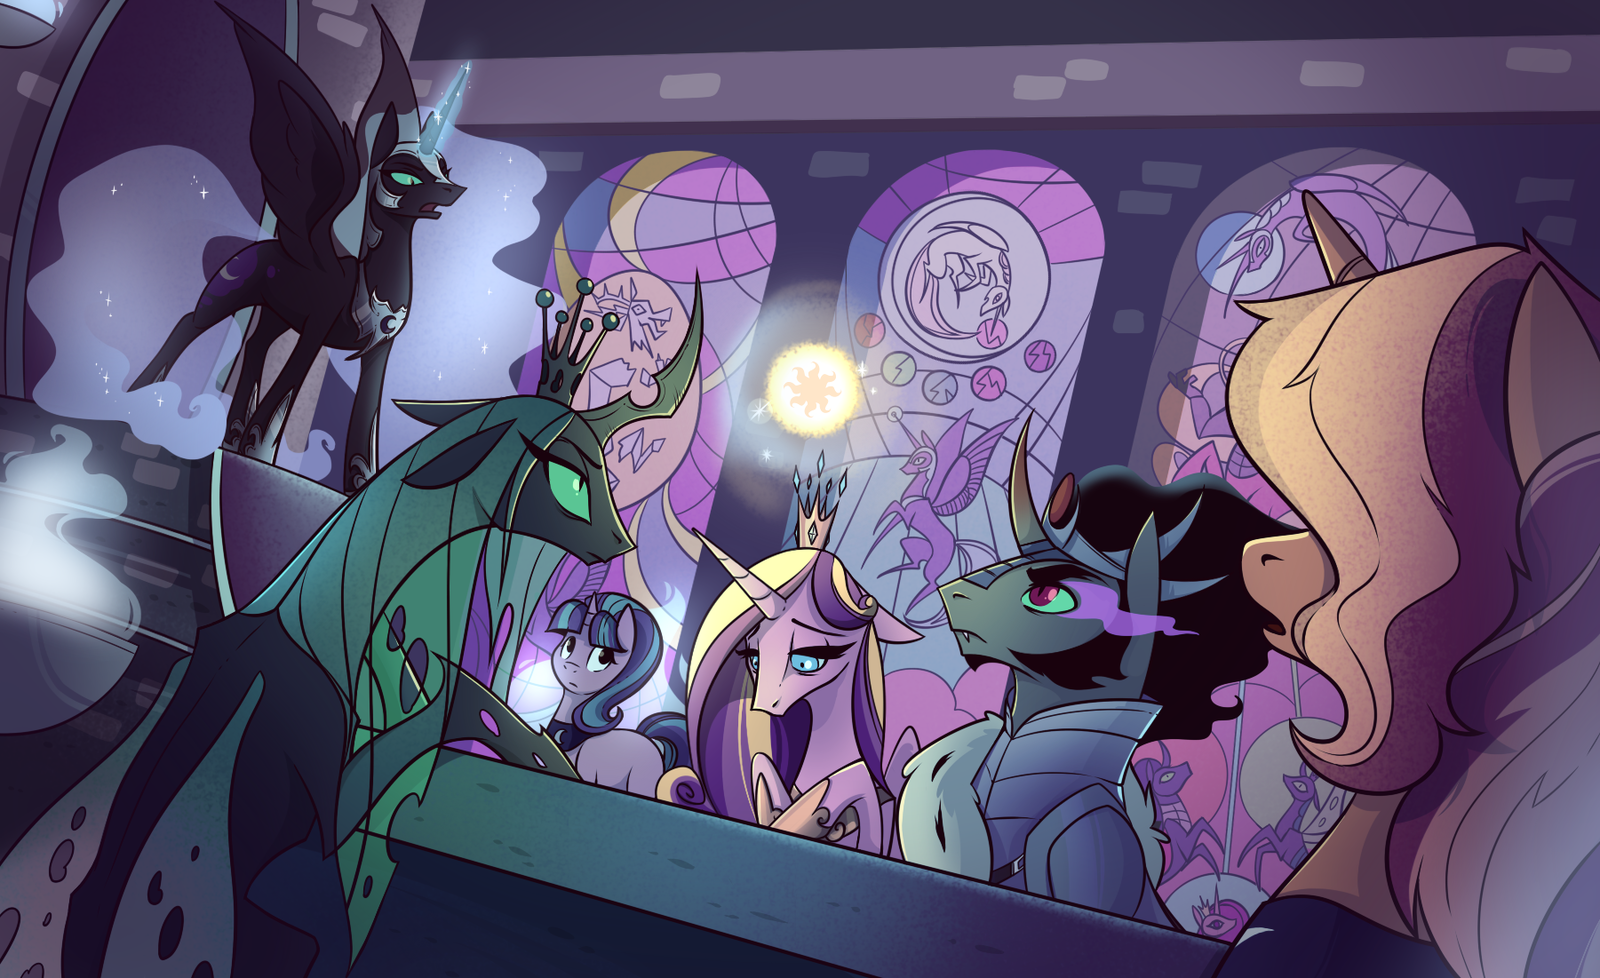 Almost the entire company is in the collection. - My little pony, Starlight Glimmer, King sombra, Queen chrysalis, Sunset shimmer, Nightmare moon, 28gooddays